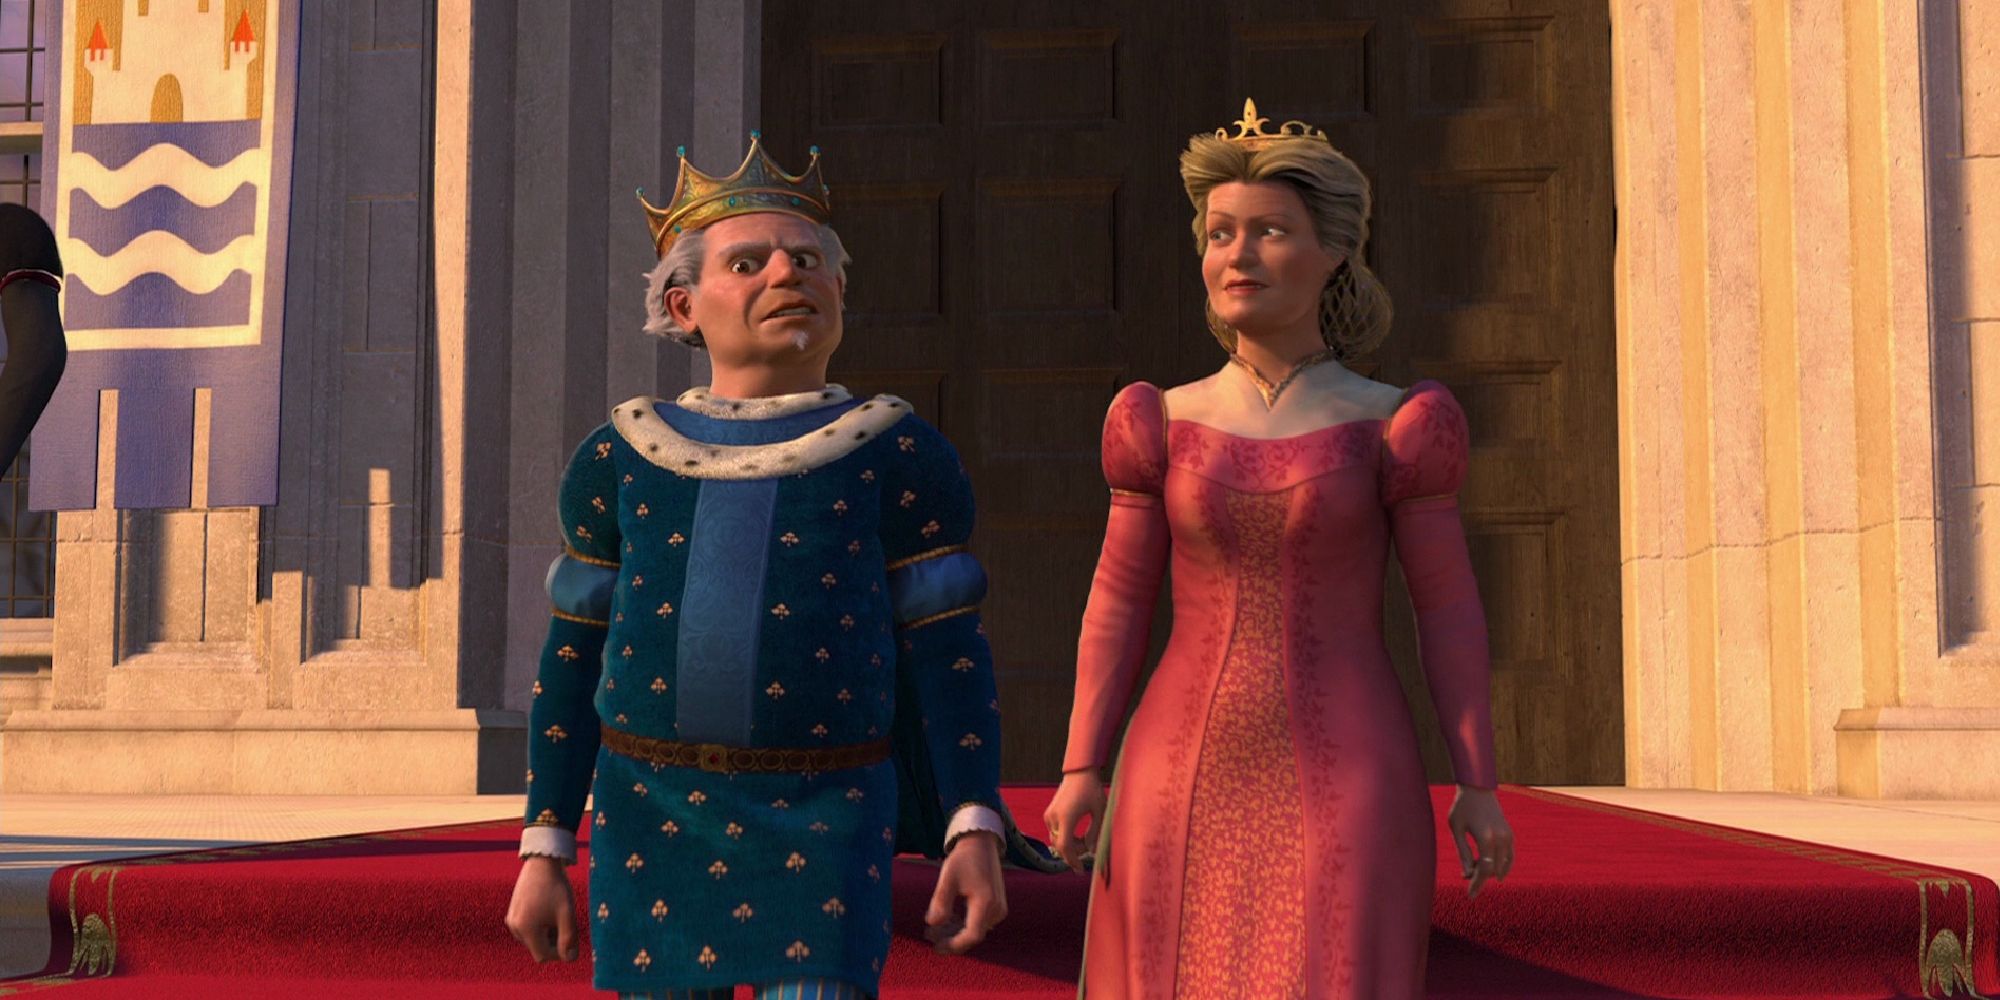 King Harold and Queen Lillian standing next to each other in Shrek 2.